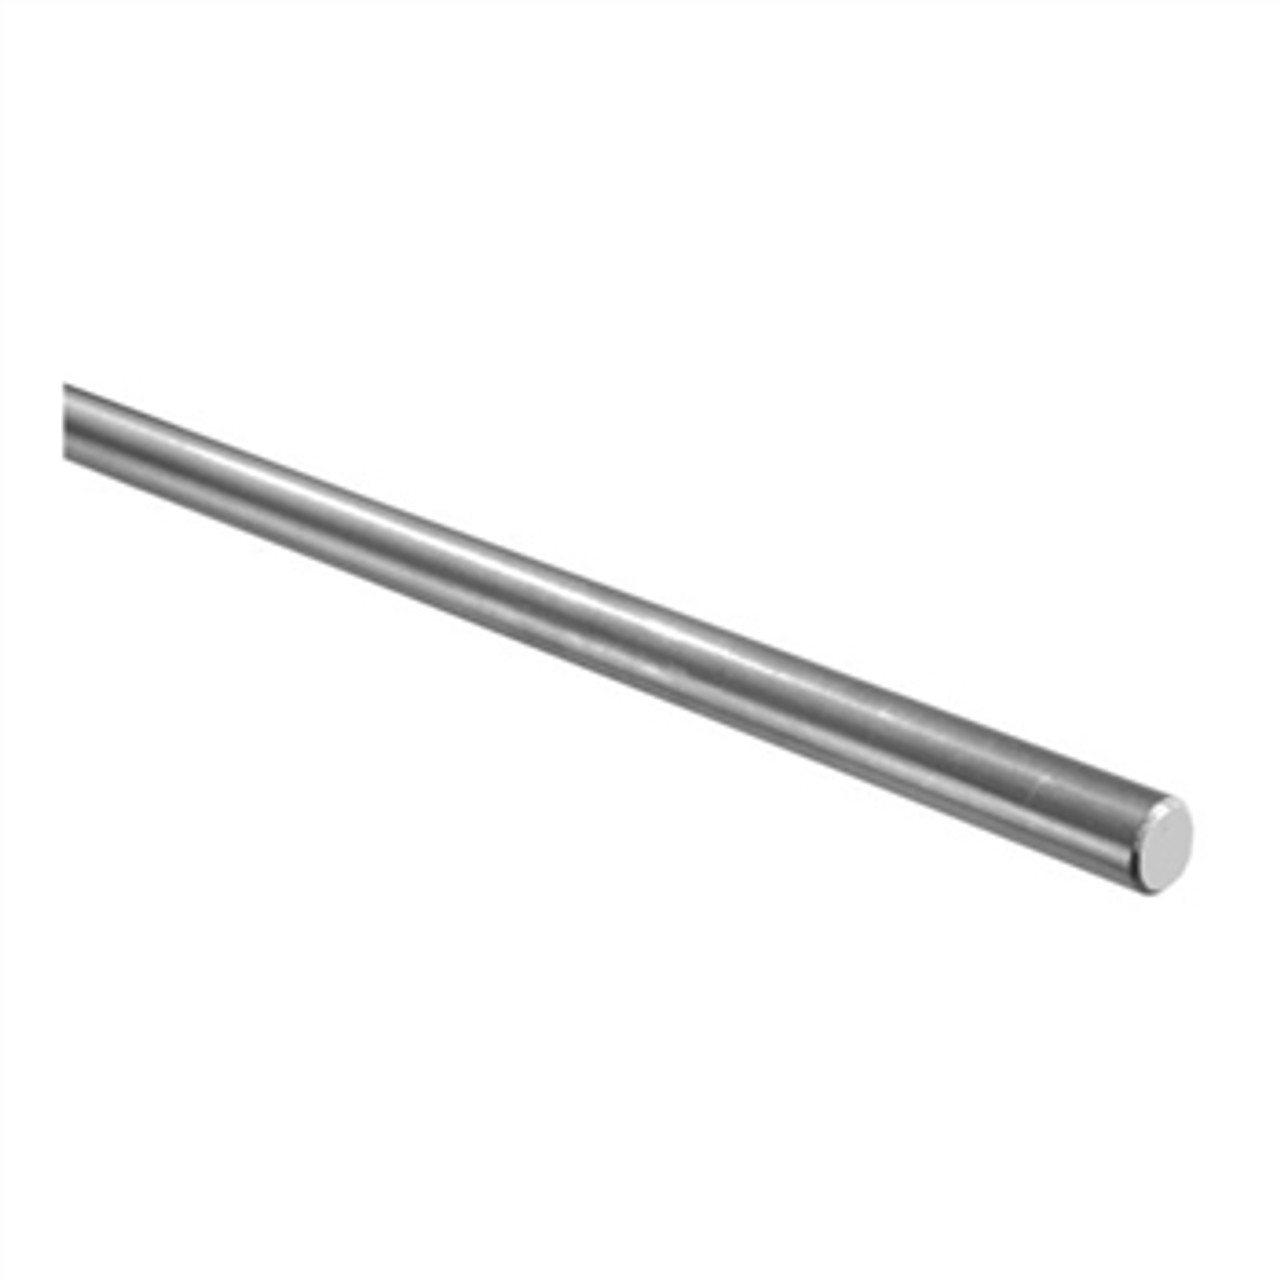 E0050/6000 9/16" Stainless Round Bar, 20'